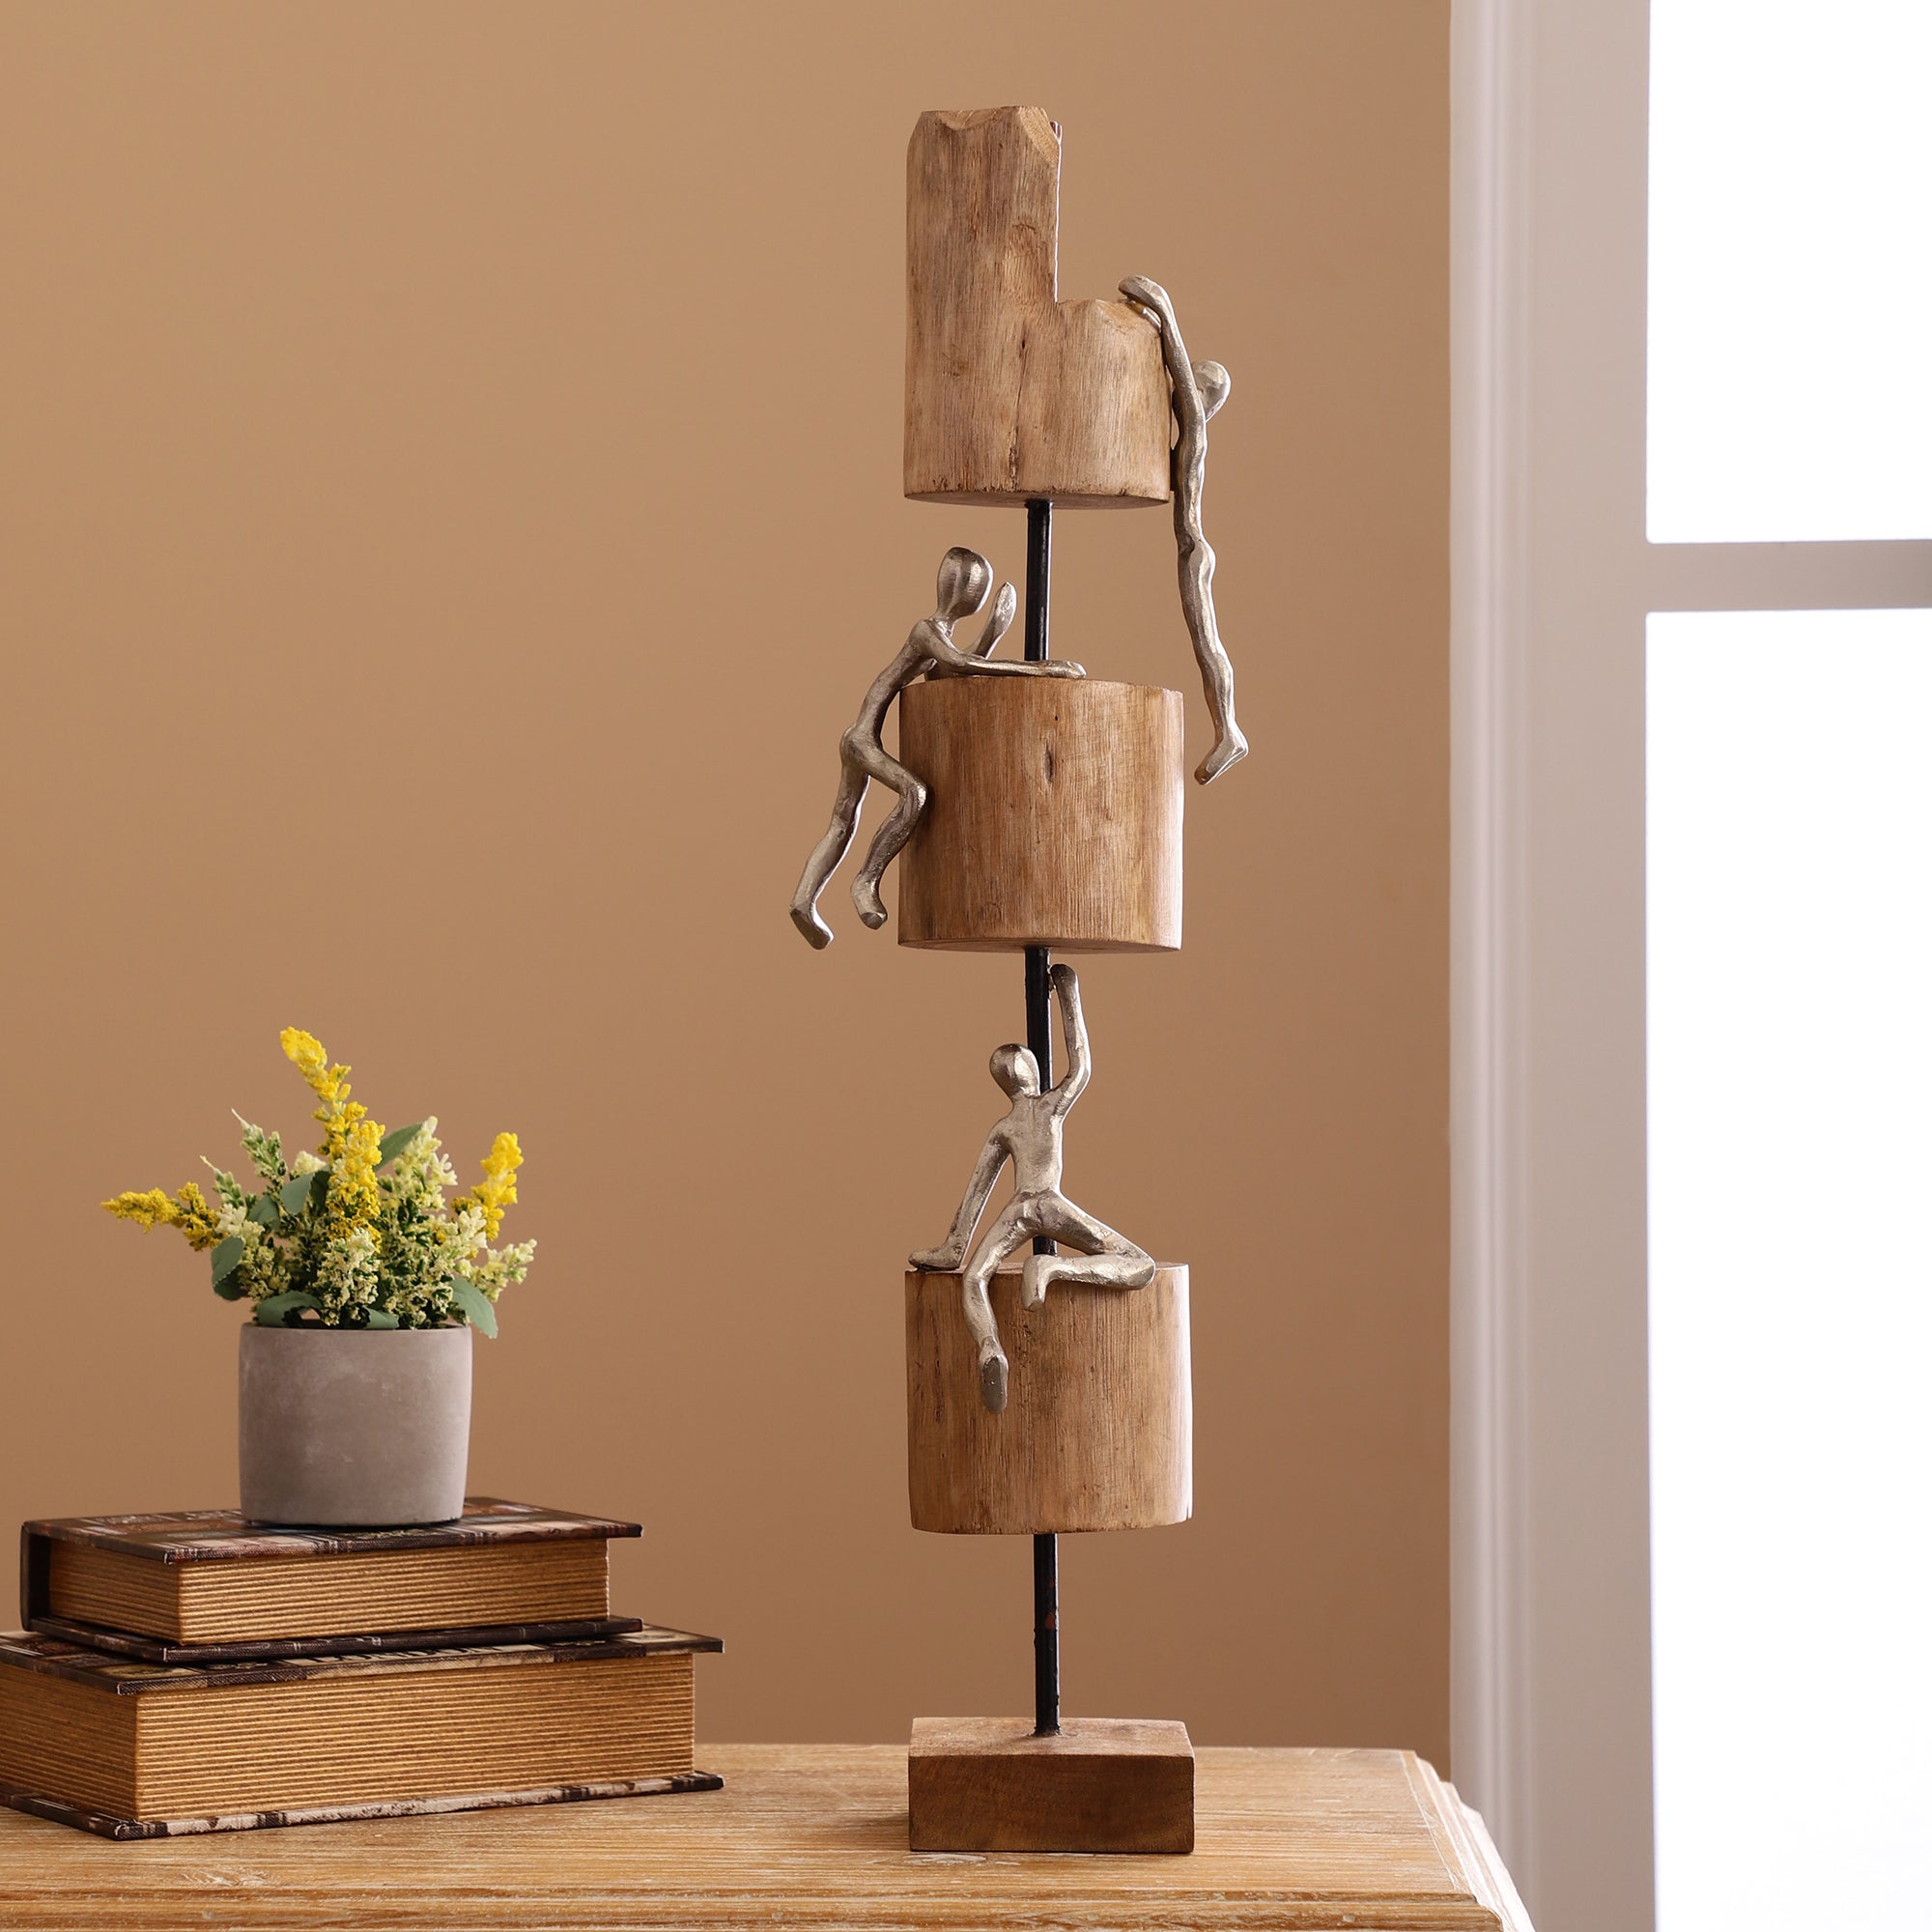 Scaling Heights Modern Wooden Table Sculpture